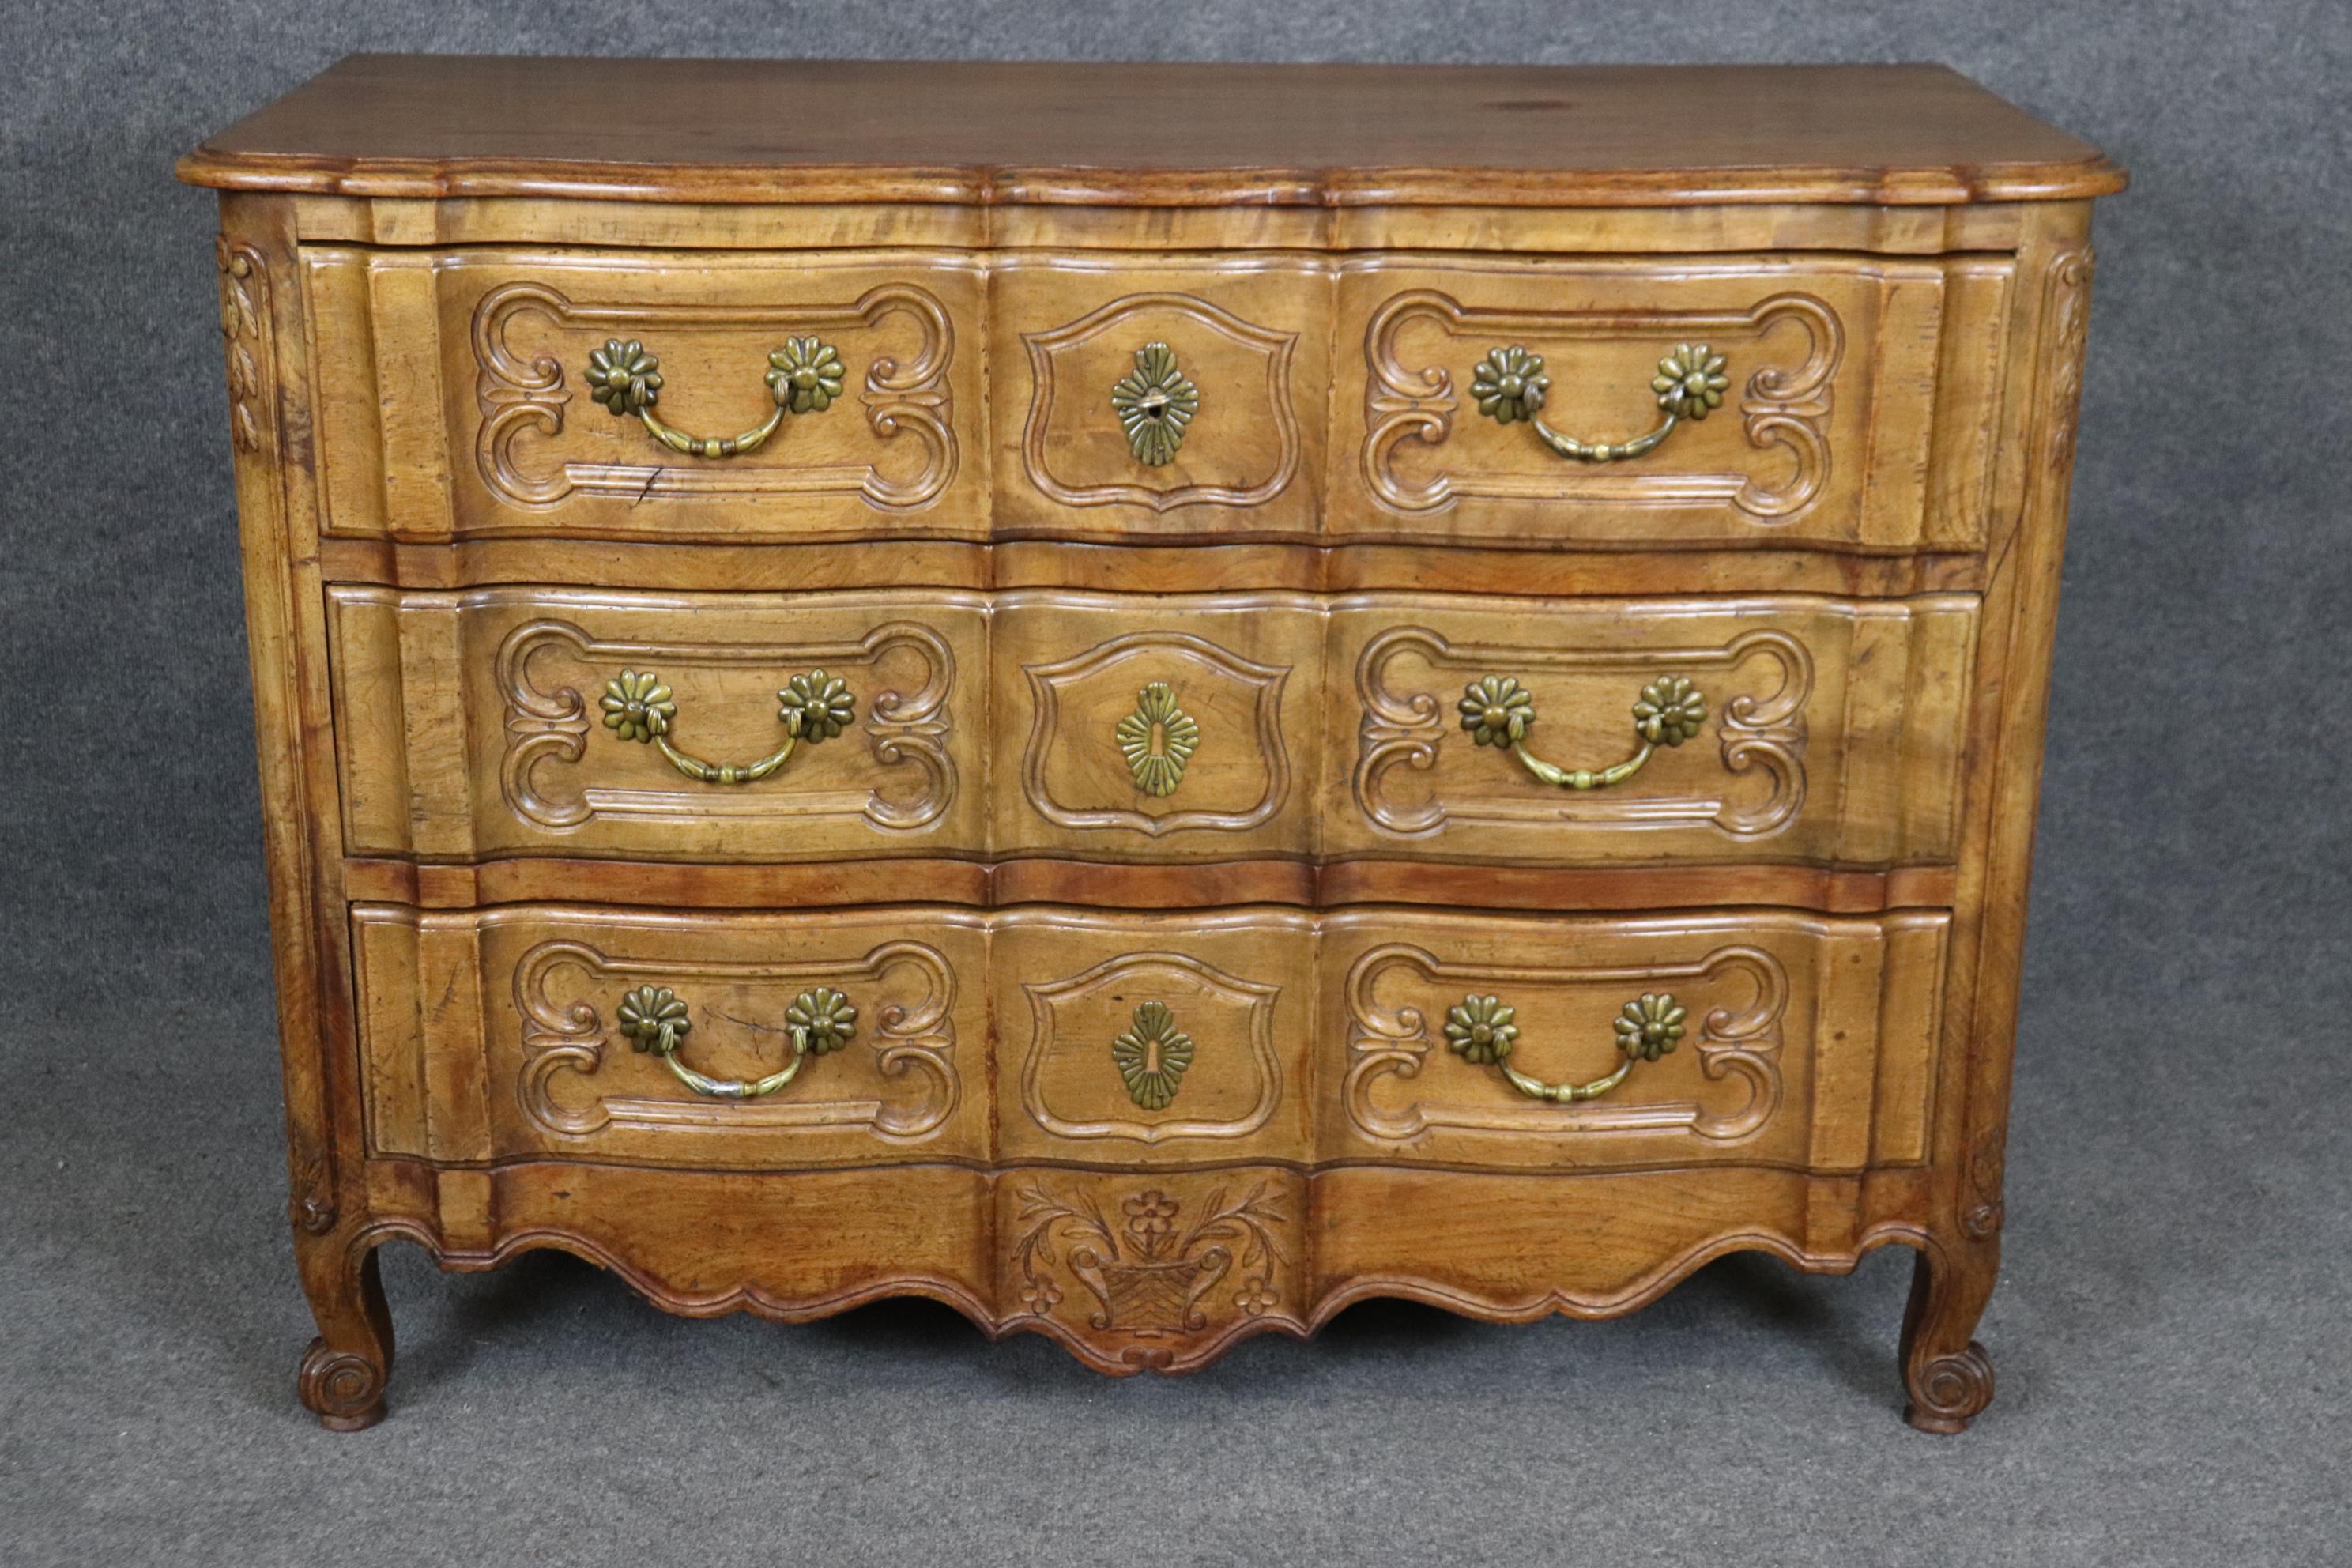 This is a superbly crafted hand-carved details in the French provincial style and looks like it was done by Auffray furniture of New York. The carving quality is exceptional, and the wood quality is equally exceptional. Measures 47.75 wide x 20.5